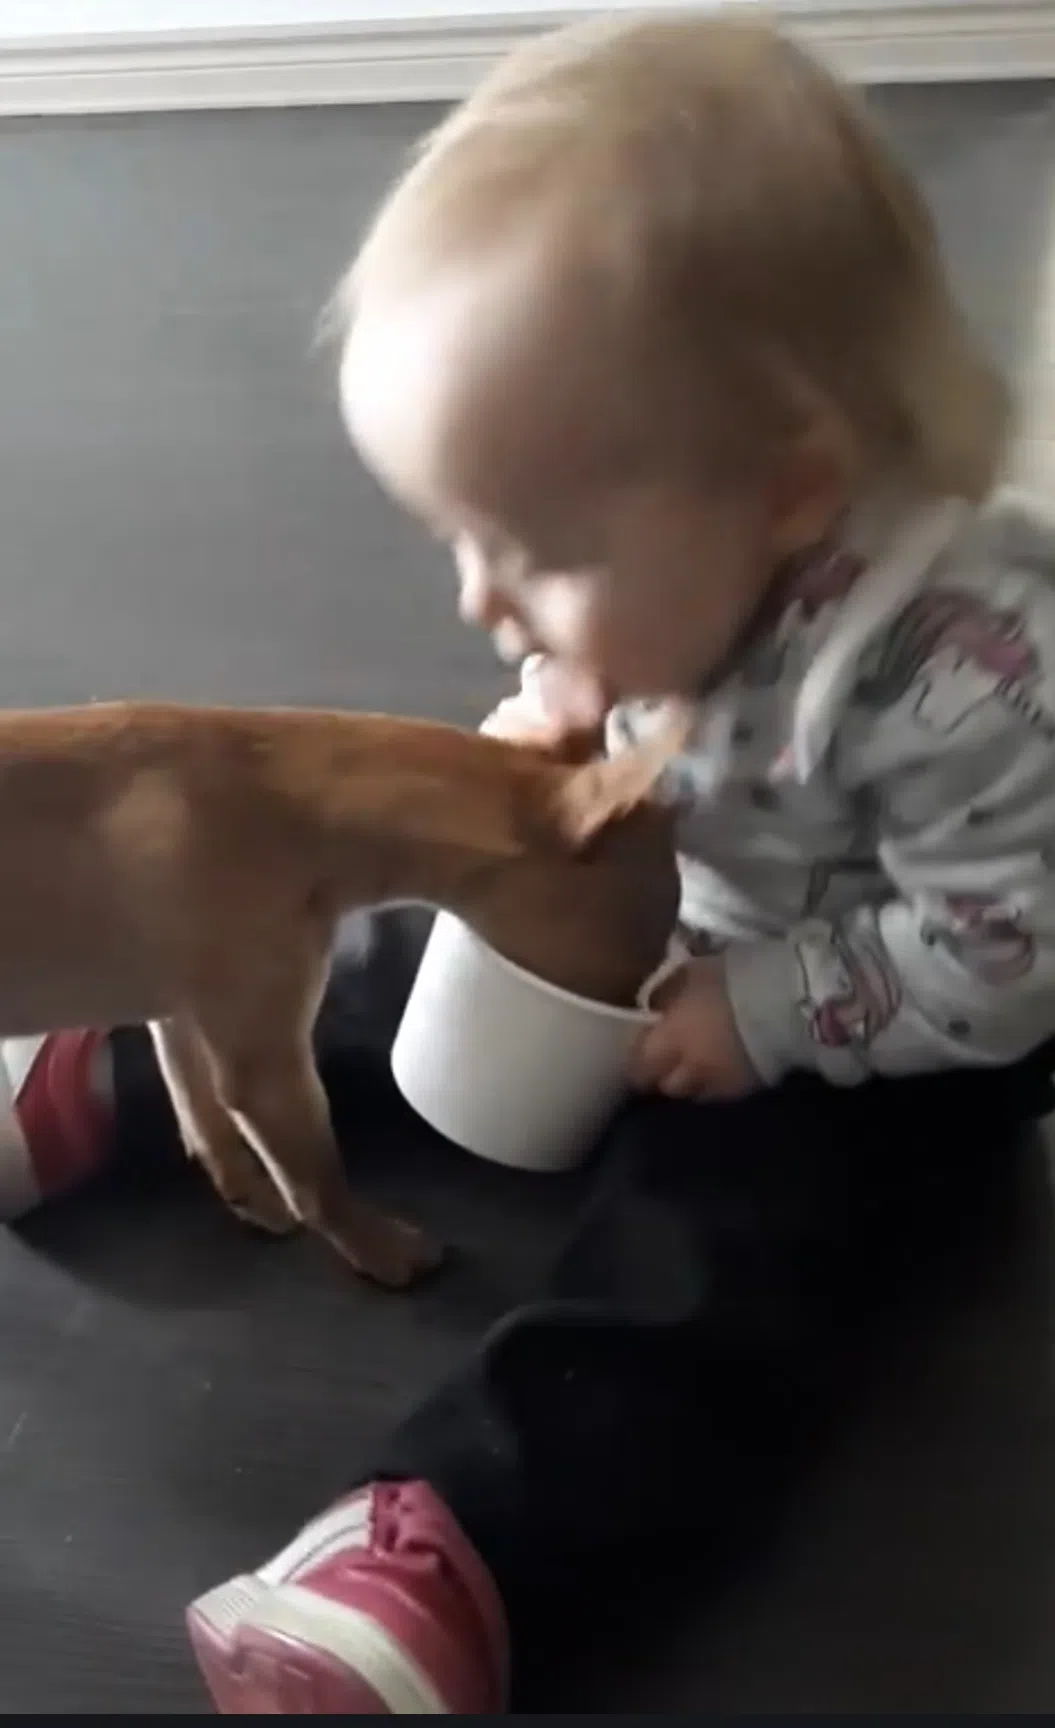 They Call It Puppy Love! (Click here to watch the video...yecchh!!)